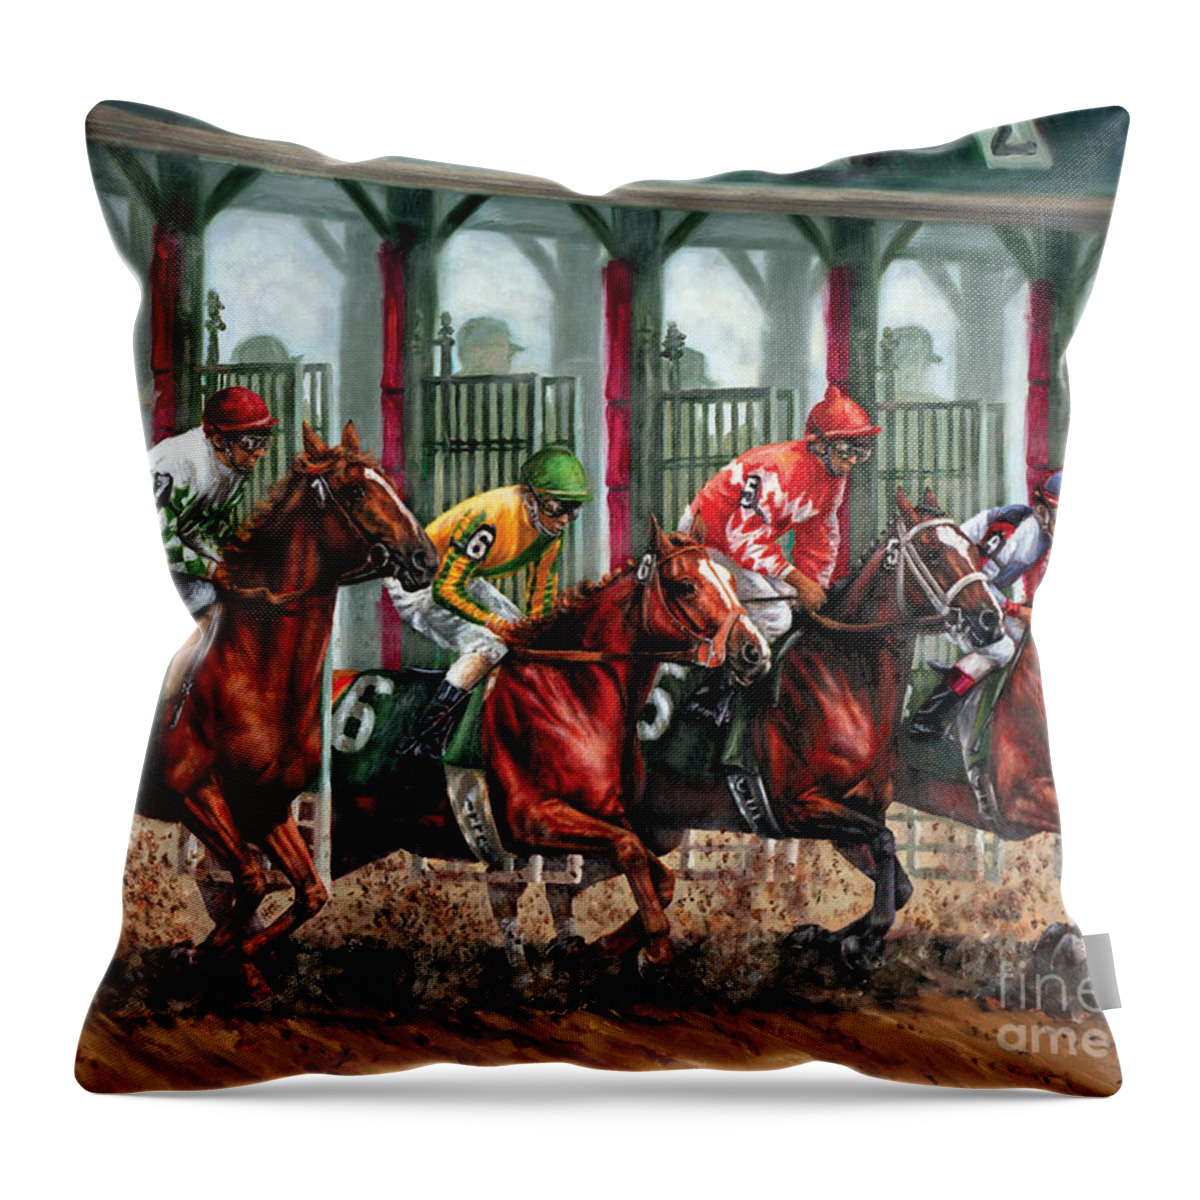  Throw Pillow featuring the painting And They're Off by Thomas Allen Pauly